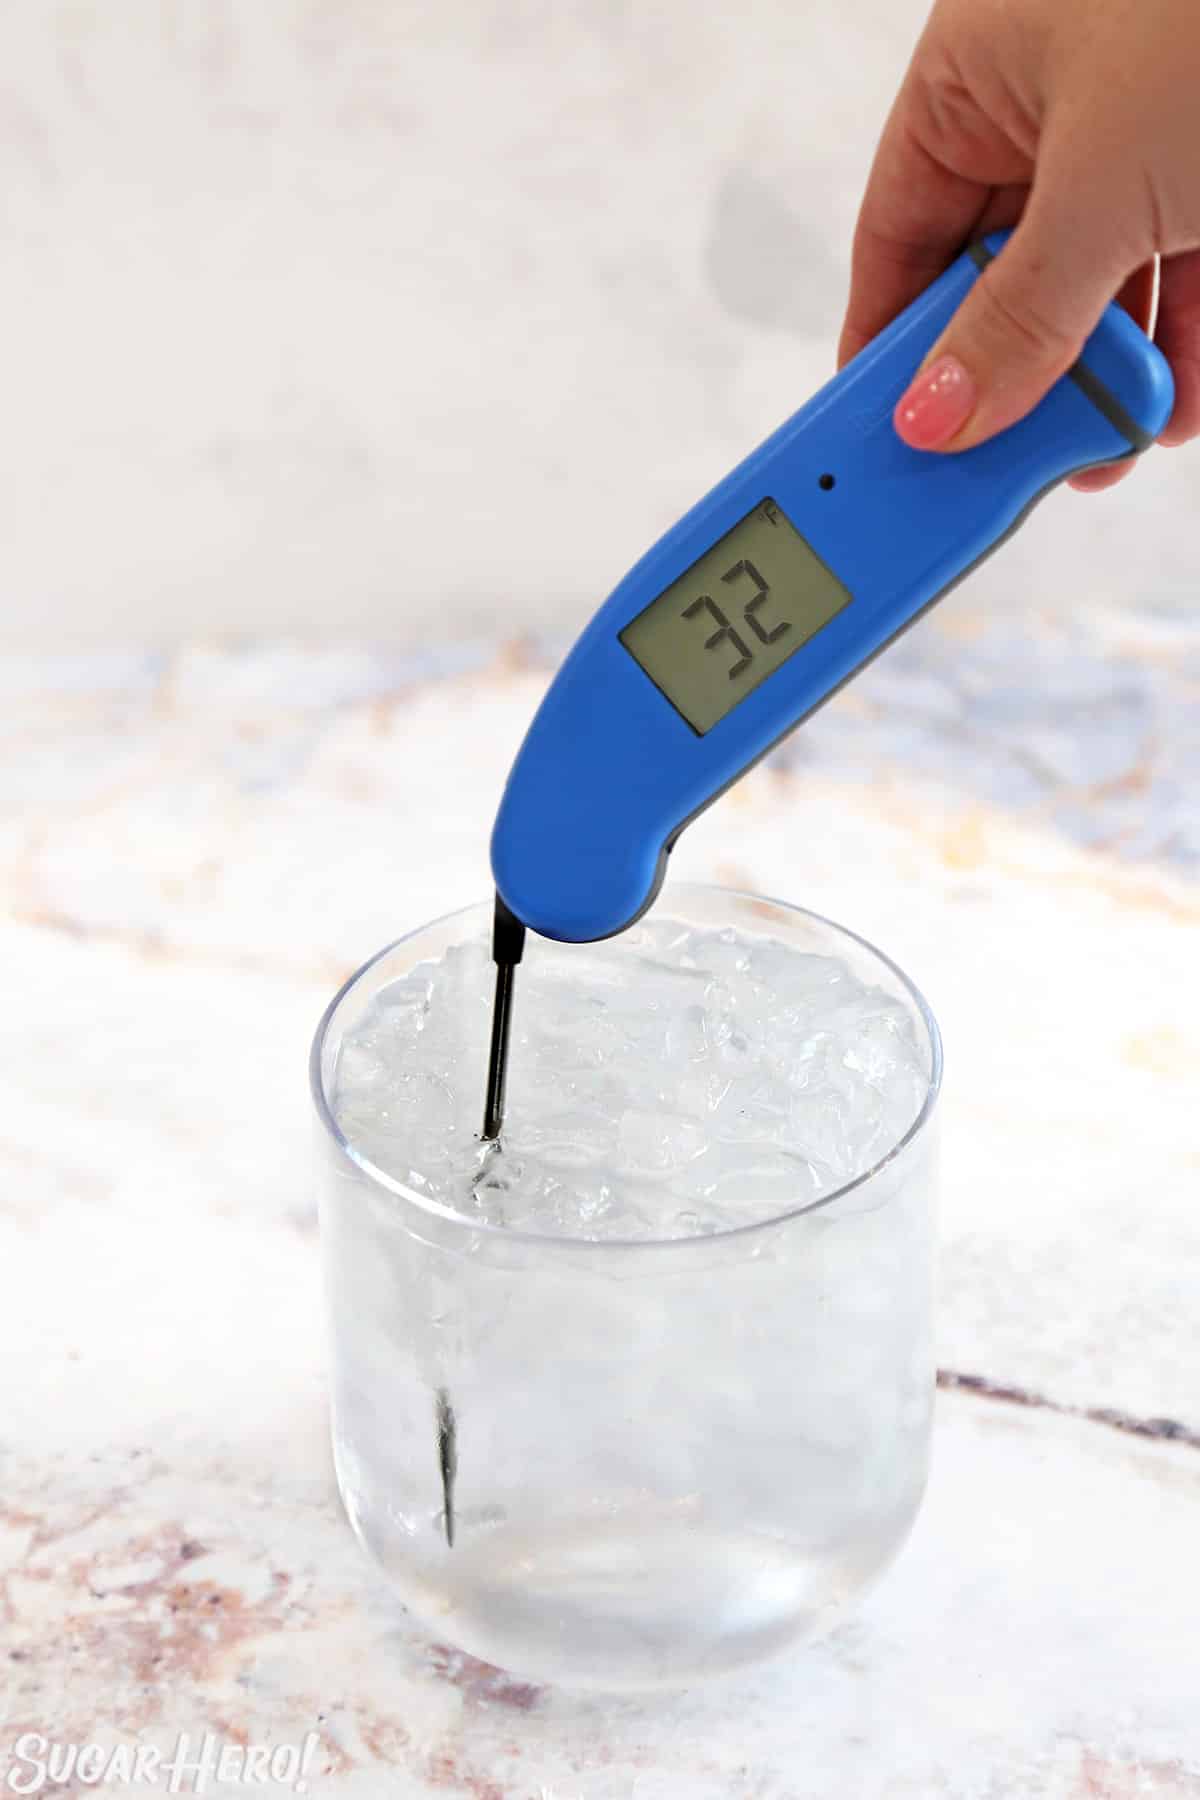 Placing a thermometer in a cup of ice water to test its accuracy.